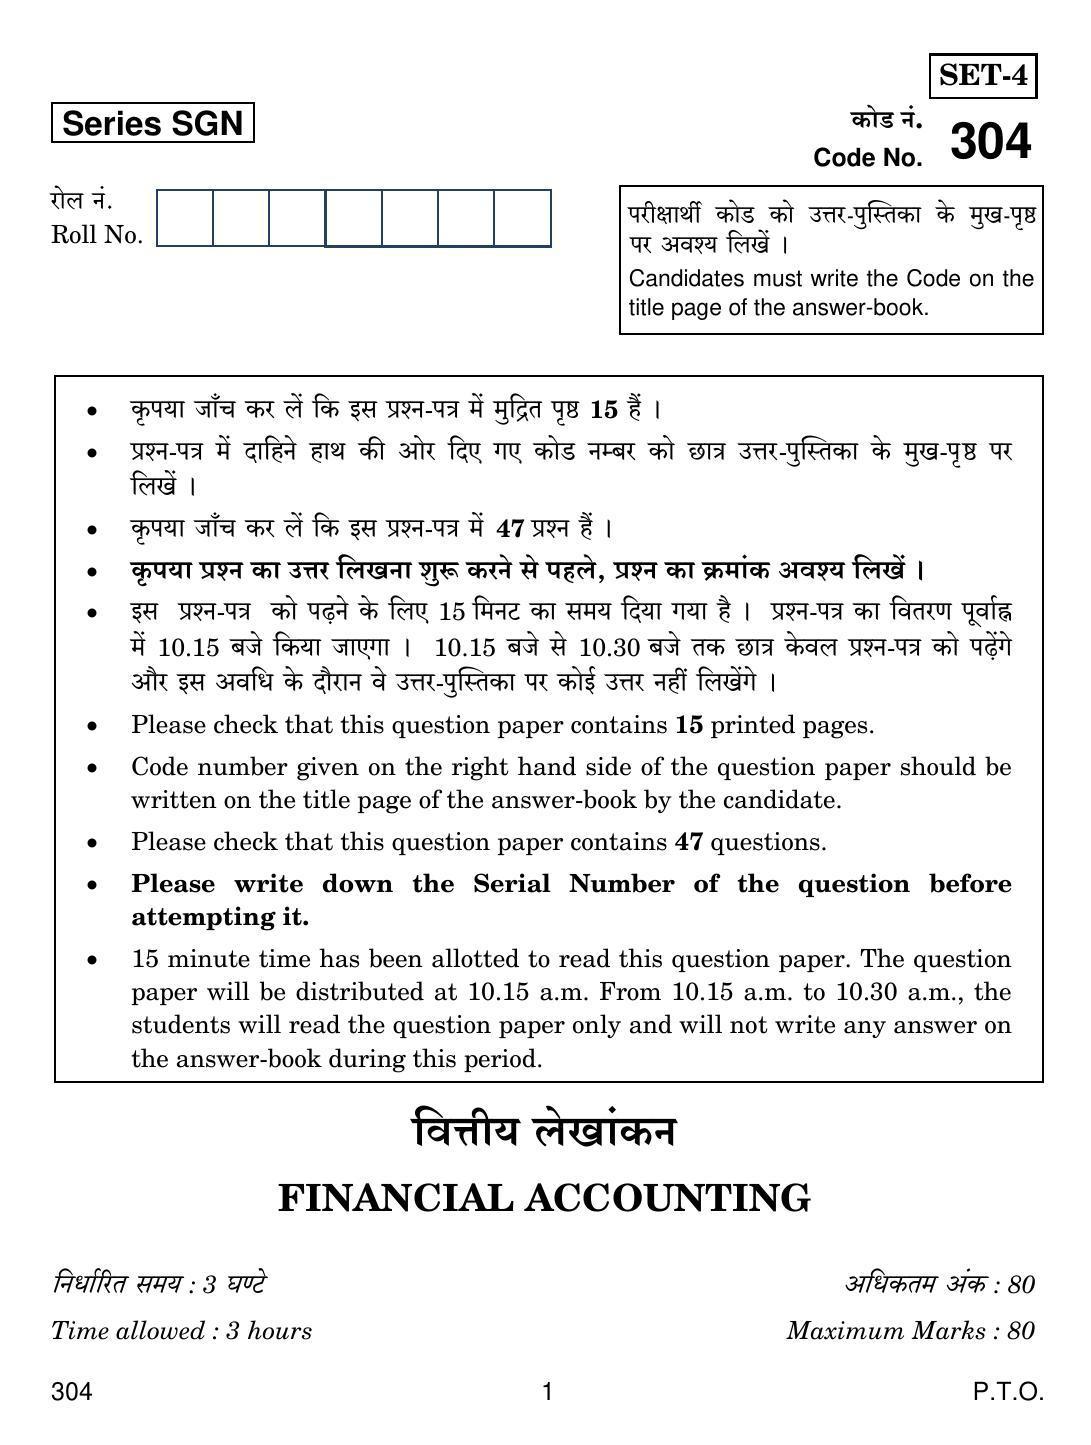 CBSE Class 12 304 FINANCIAL ACCOUNTING 2018 Question Paper - Page 1